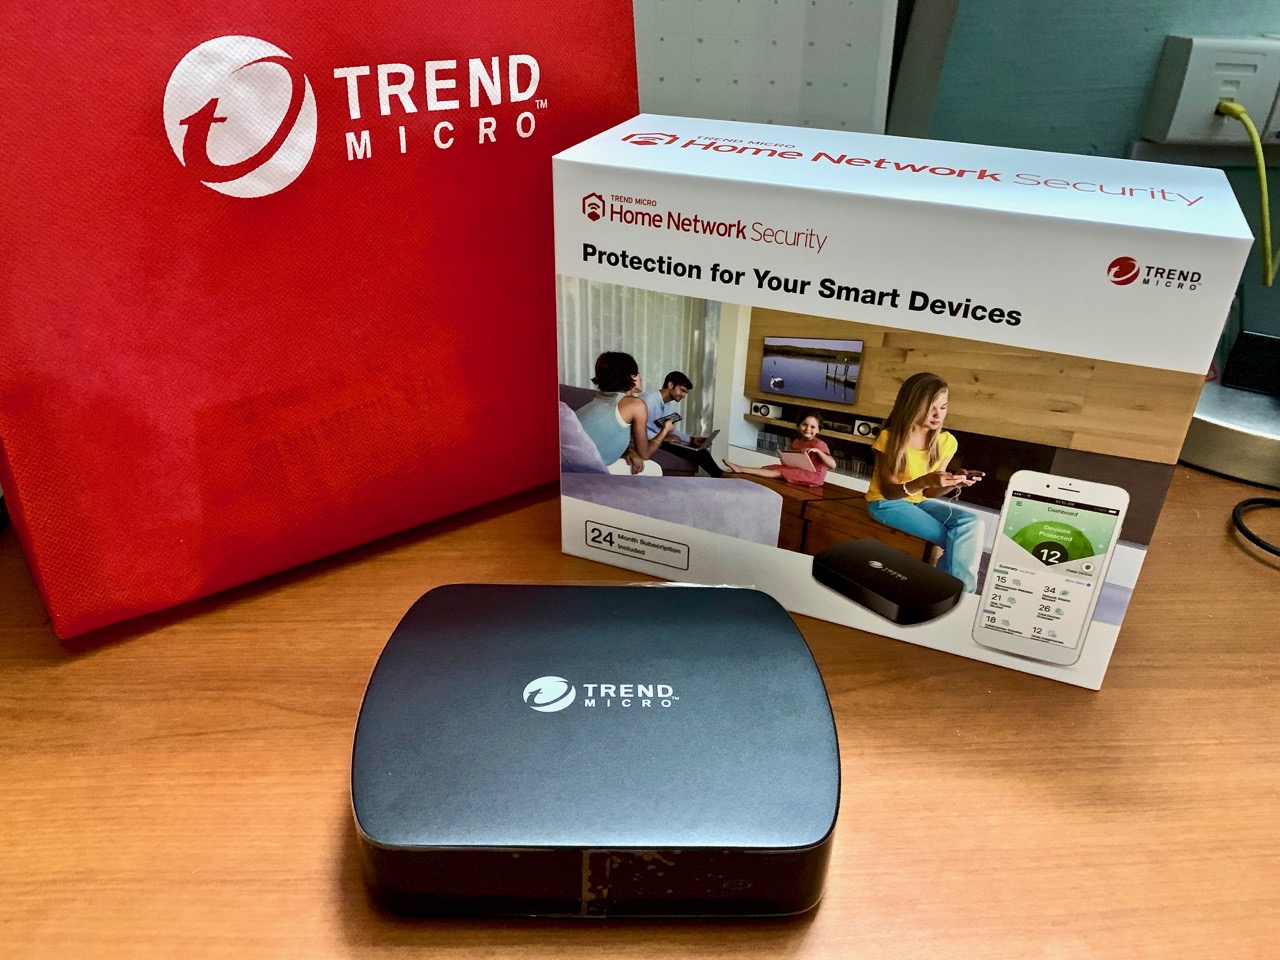 Trend Micro launched Home Network Security